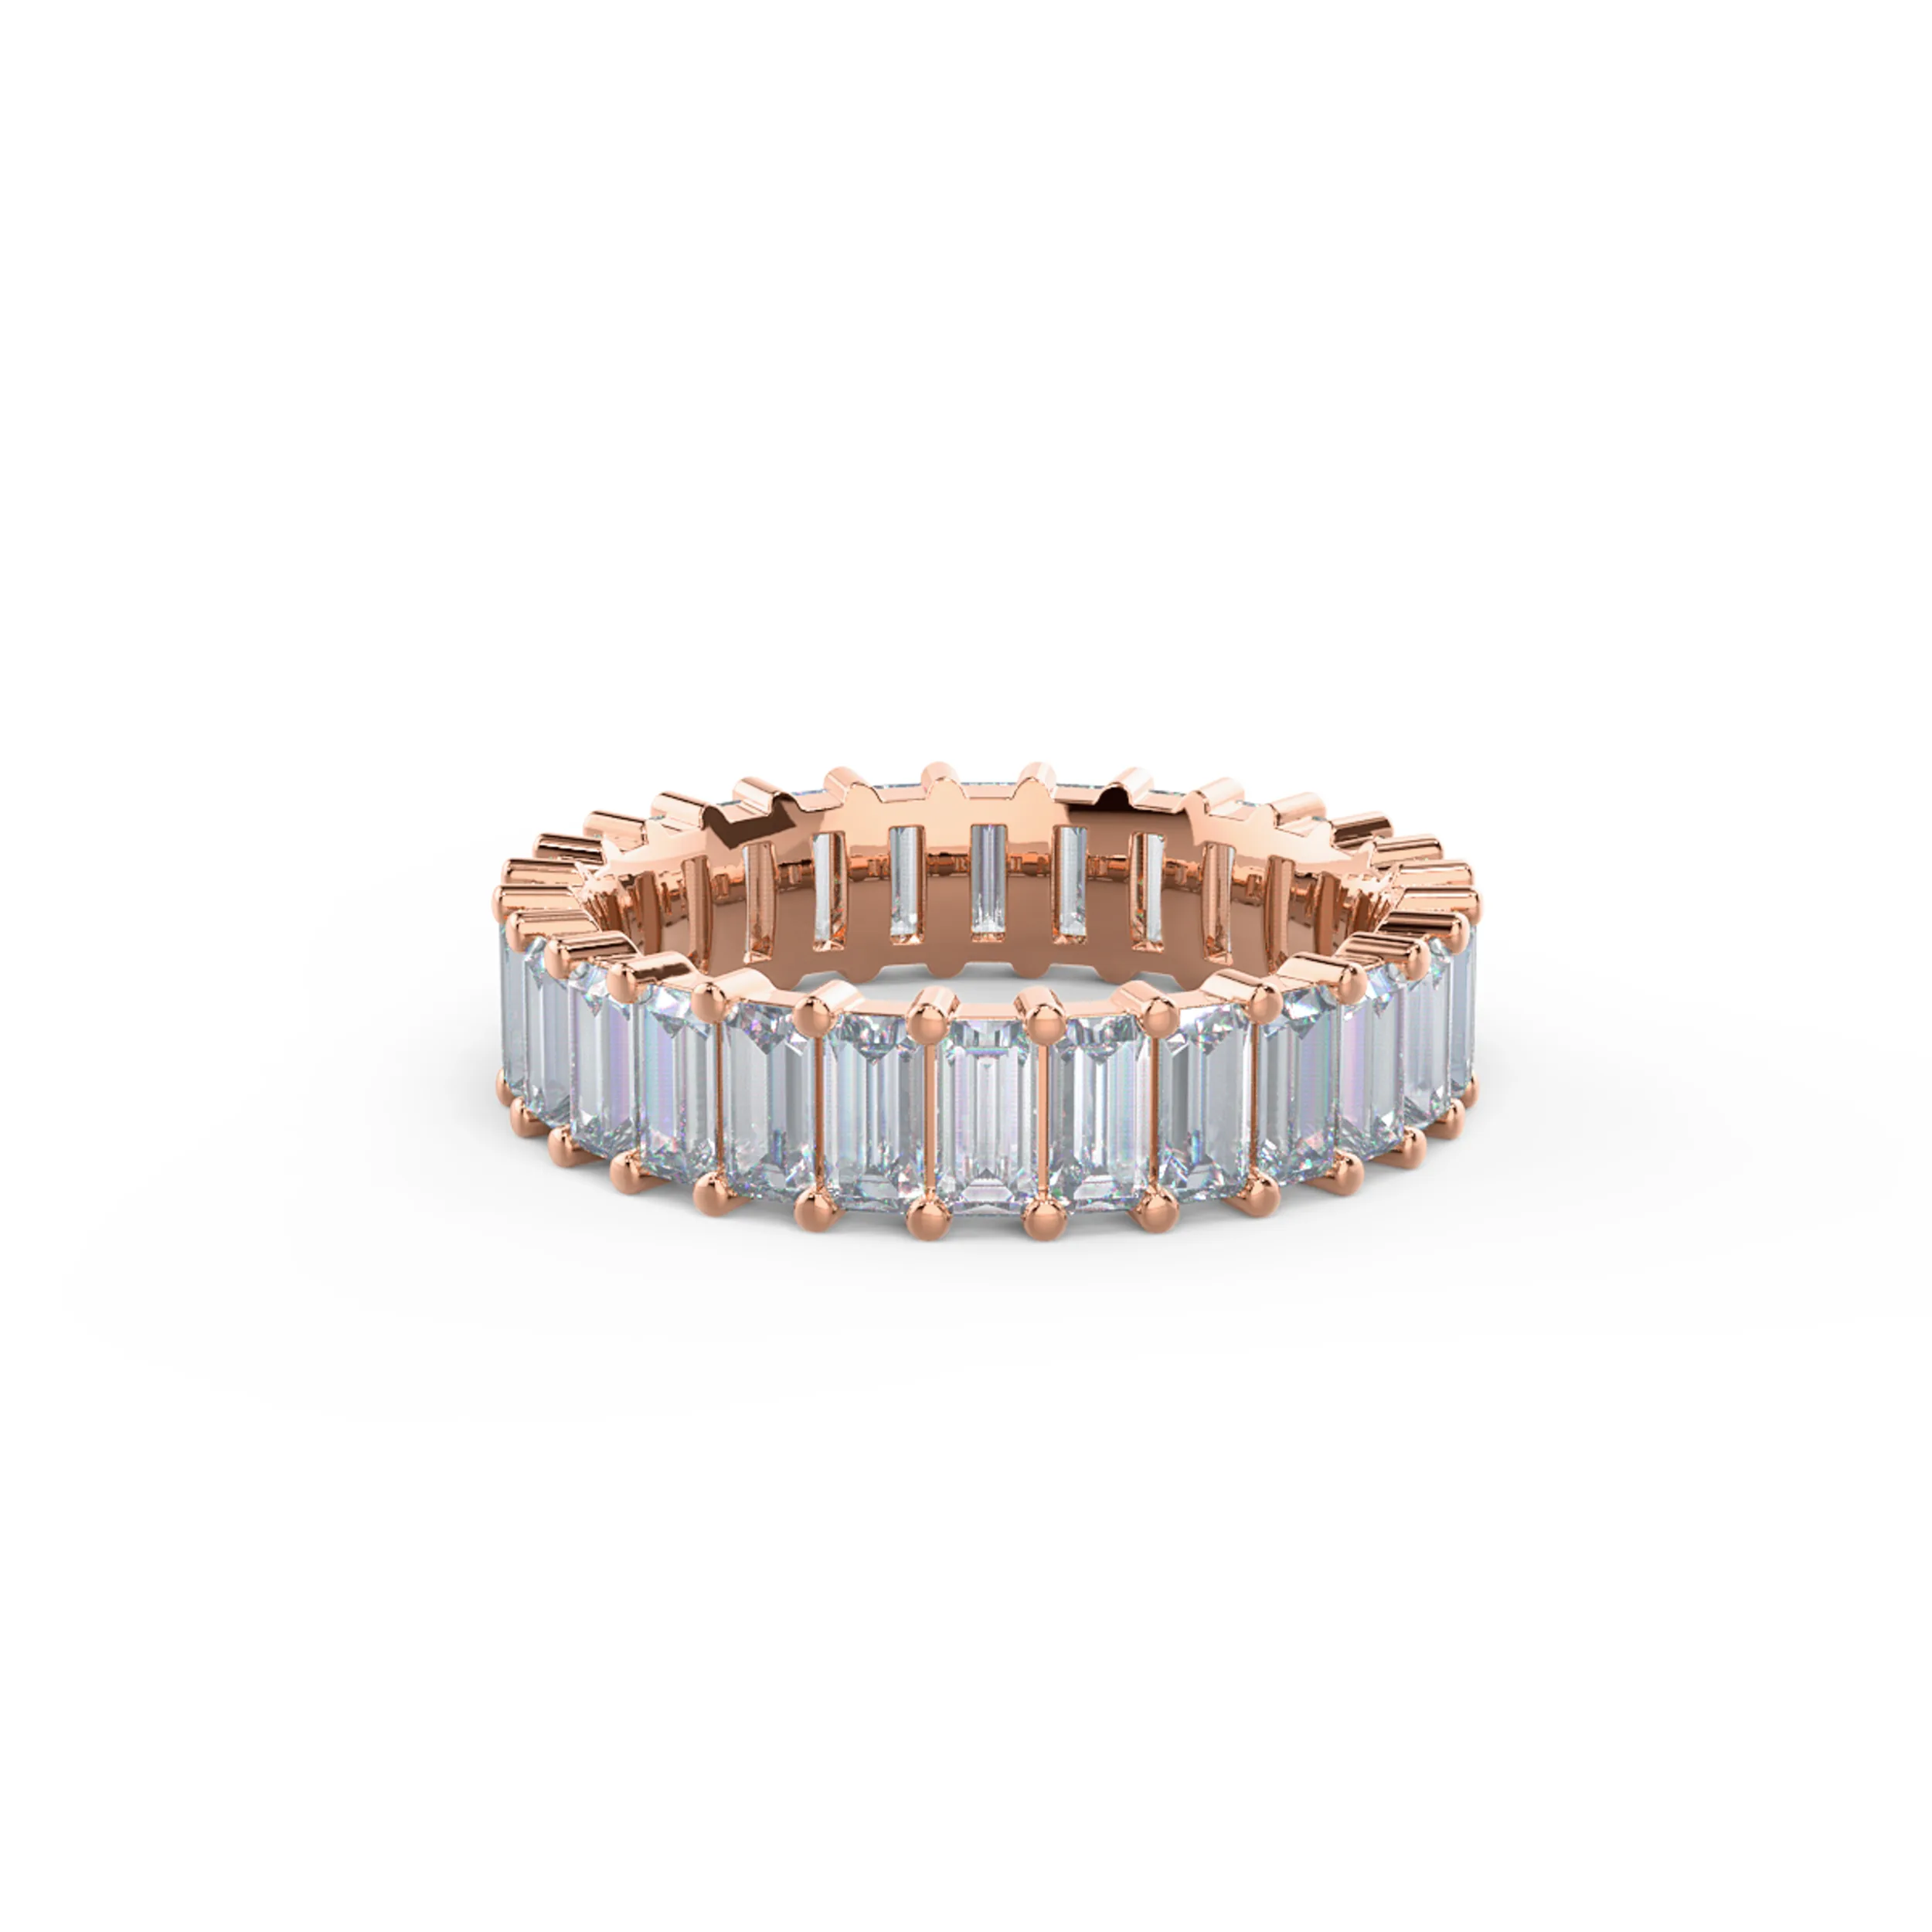 2.8 ct Lab Diamonds set in 14k Rose Gold Baguette Eternity Band (Main View)